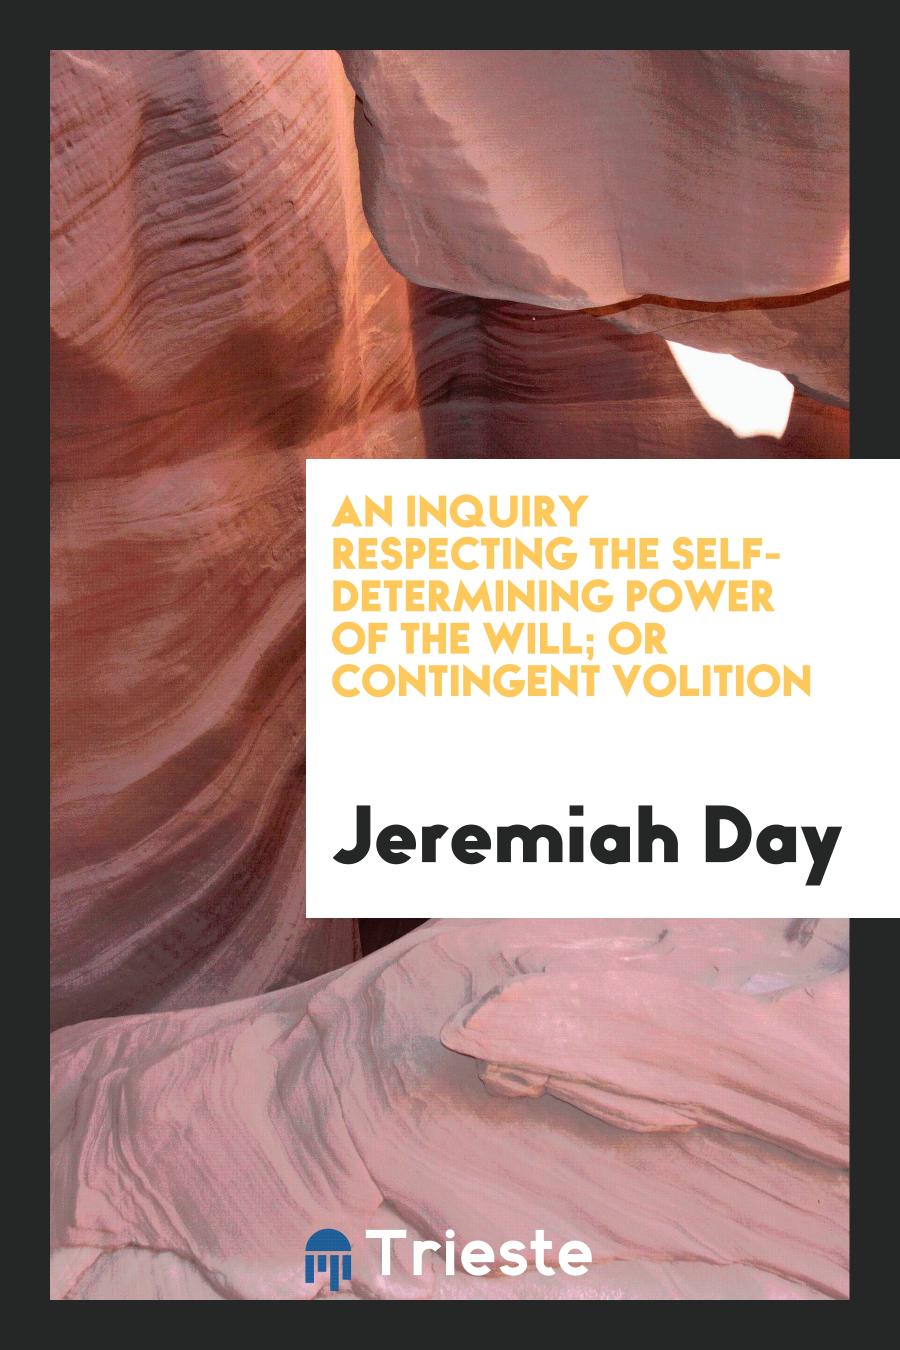 An Inquiry Respecting the Self-Determining Power of the Will; Or Contingent Volition